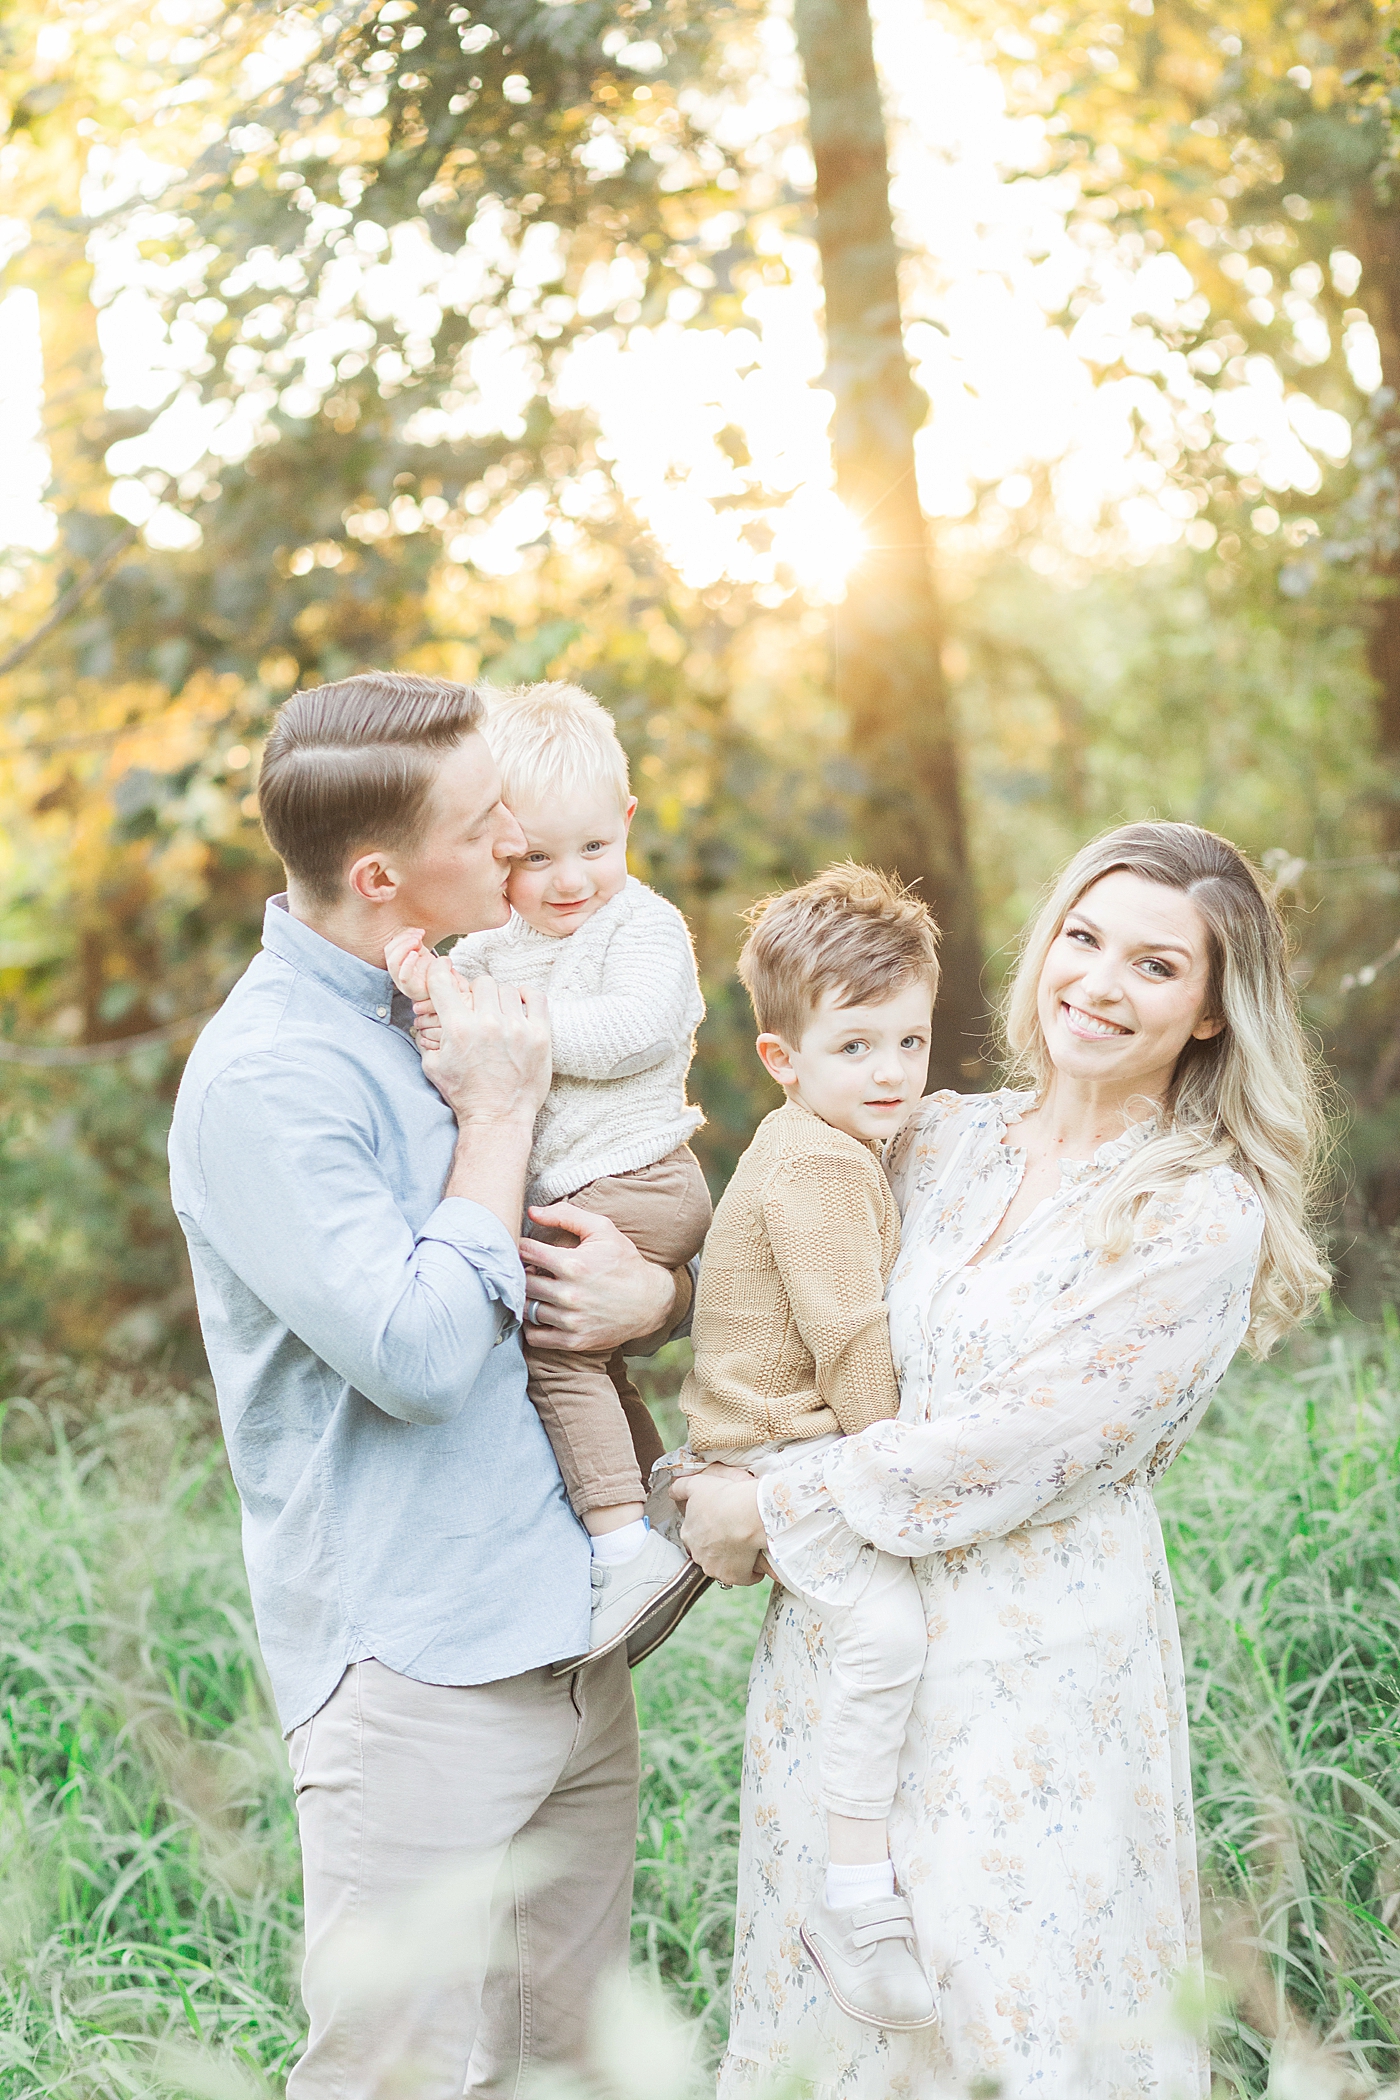 Family session in a field in The Heights at sunset. Photo by Fresh Light Photography